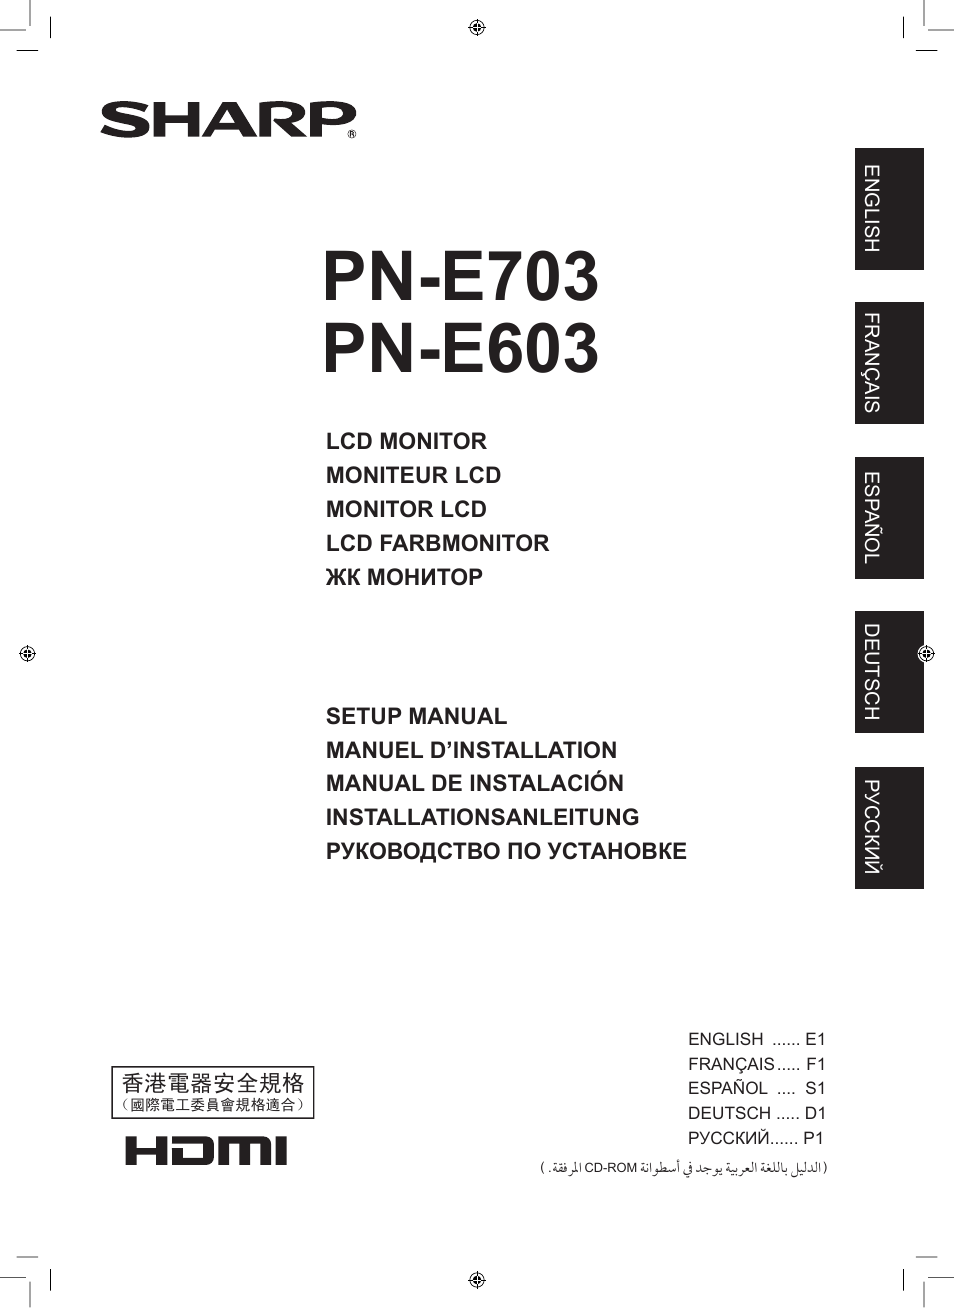 Sharp PN-E703 User Manual | 44 pages